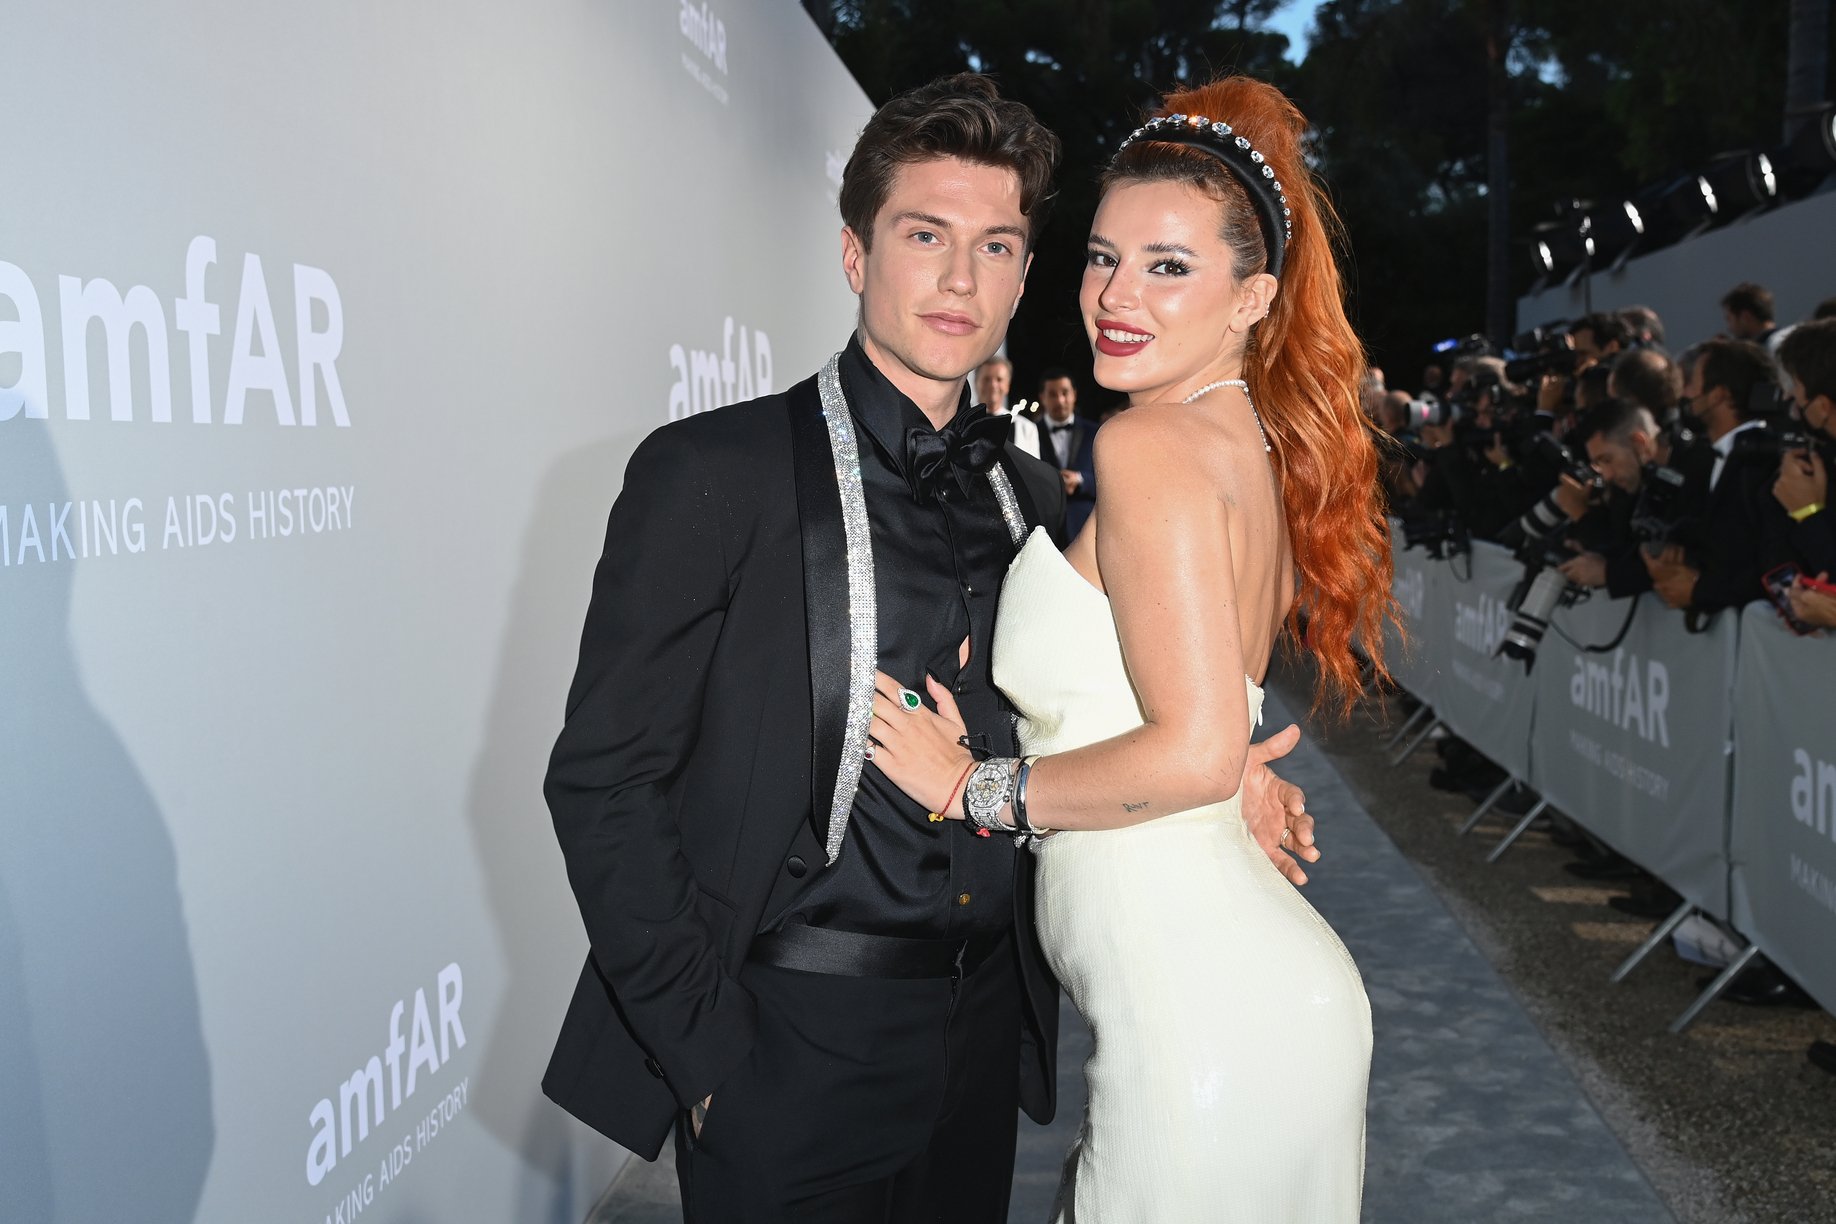 Bella Thorne to reunite with ex-fiancé for 'Time Is Up' sequel